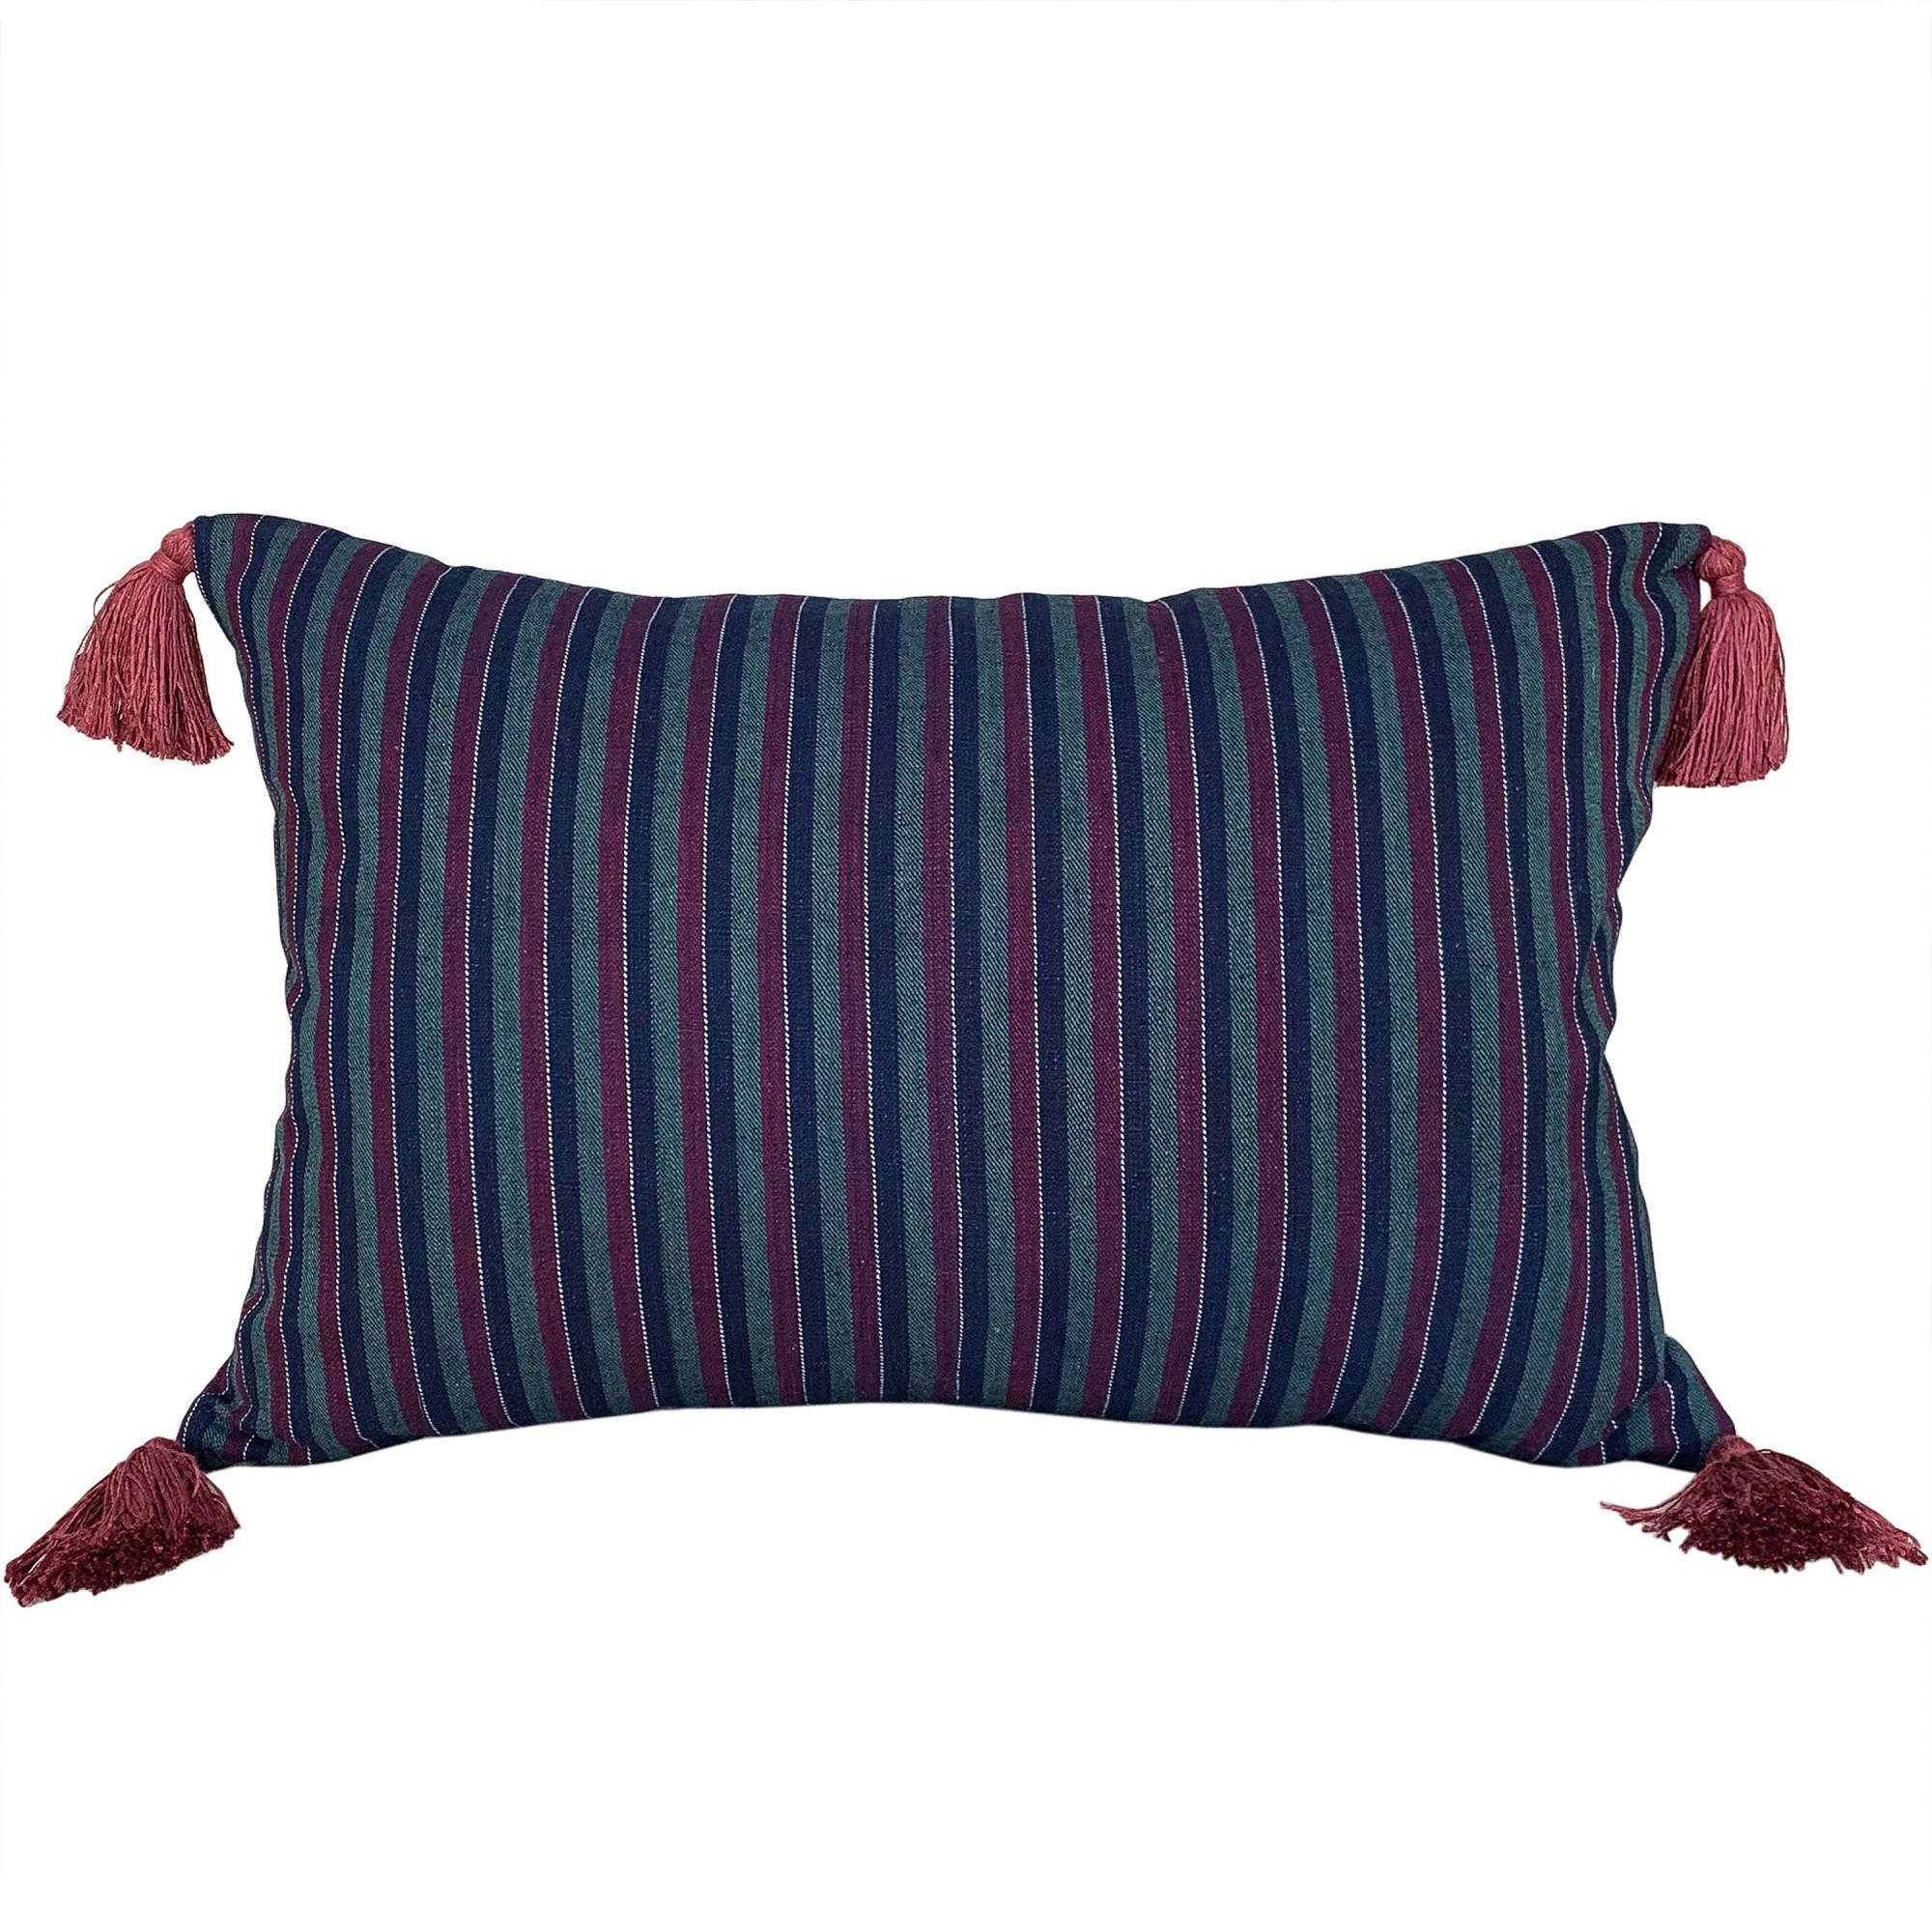 Songjiang Cushions With Tassels